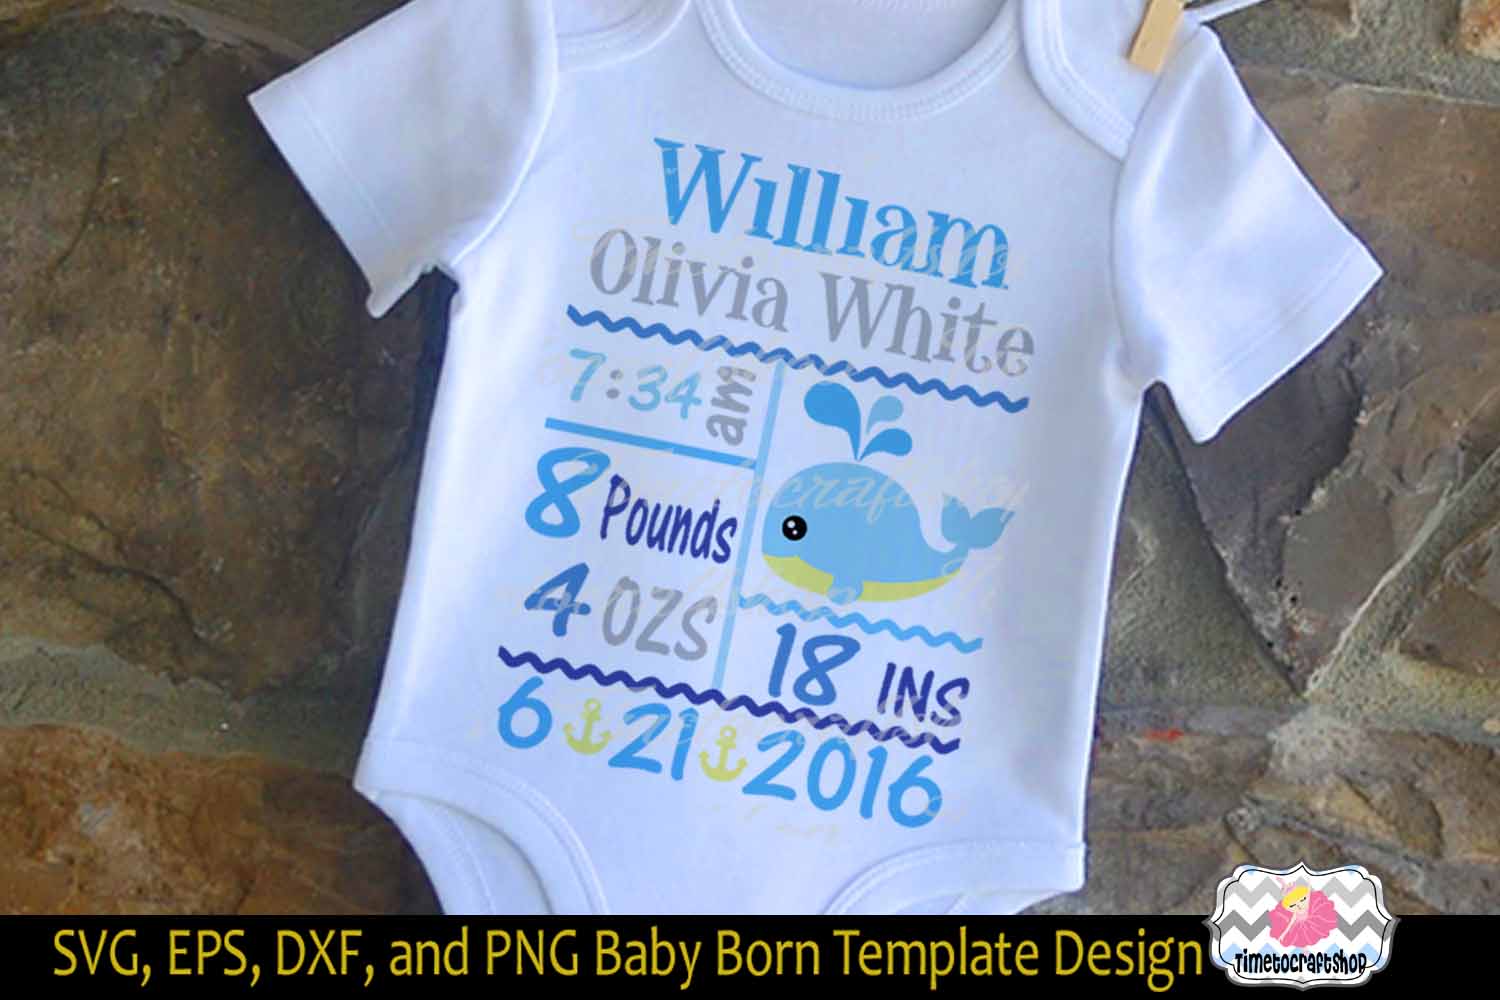 Download SVG, Dxf, Png & Eps Baby Birth Announcement Template